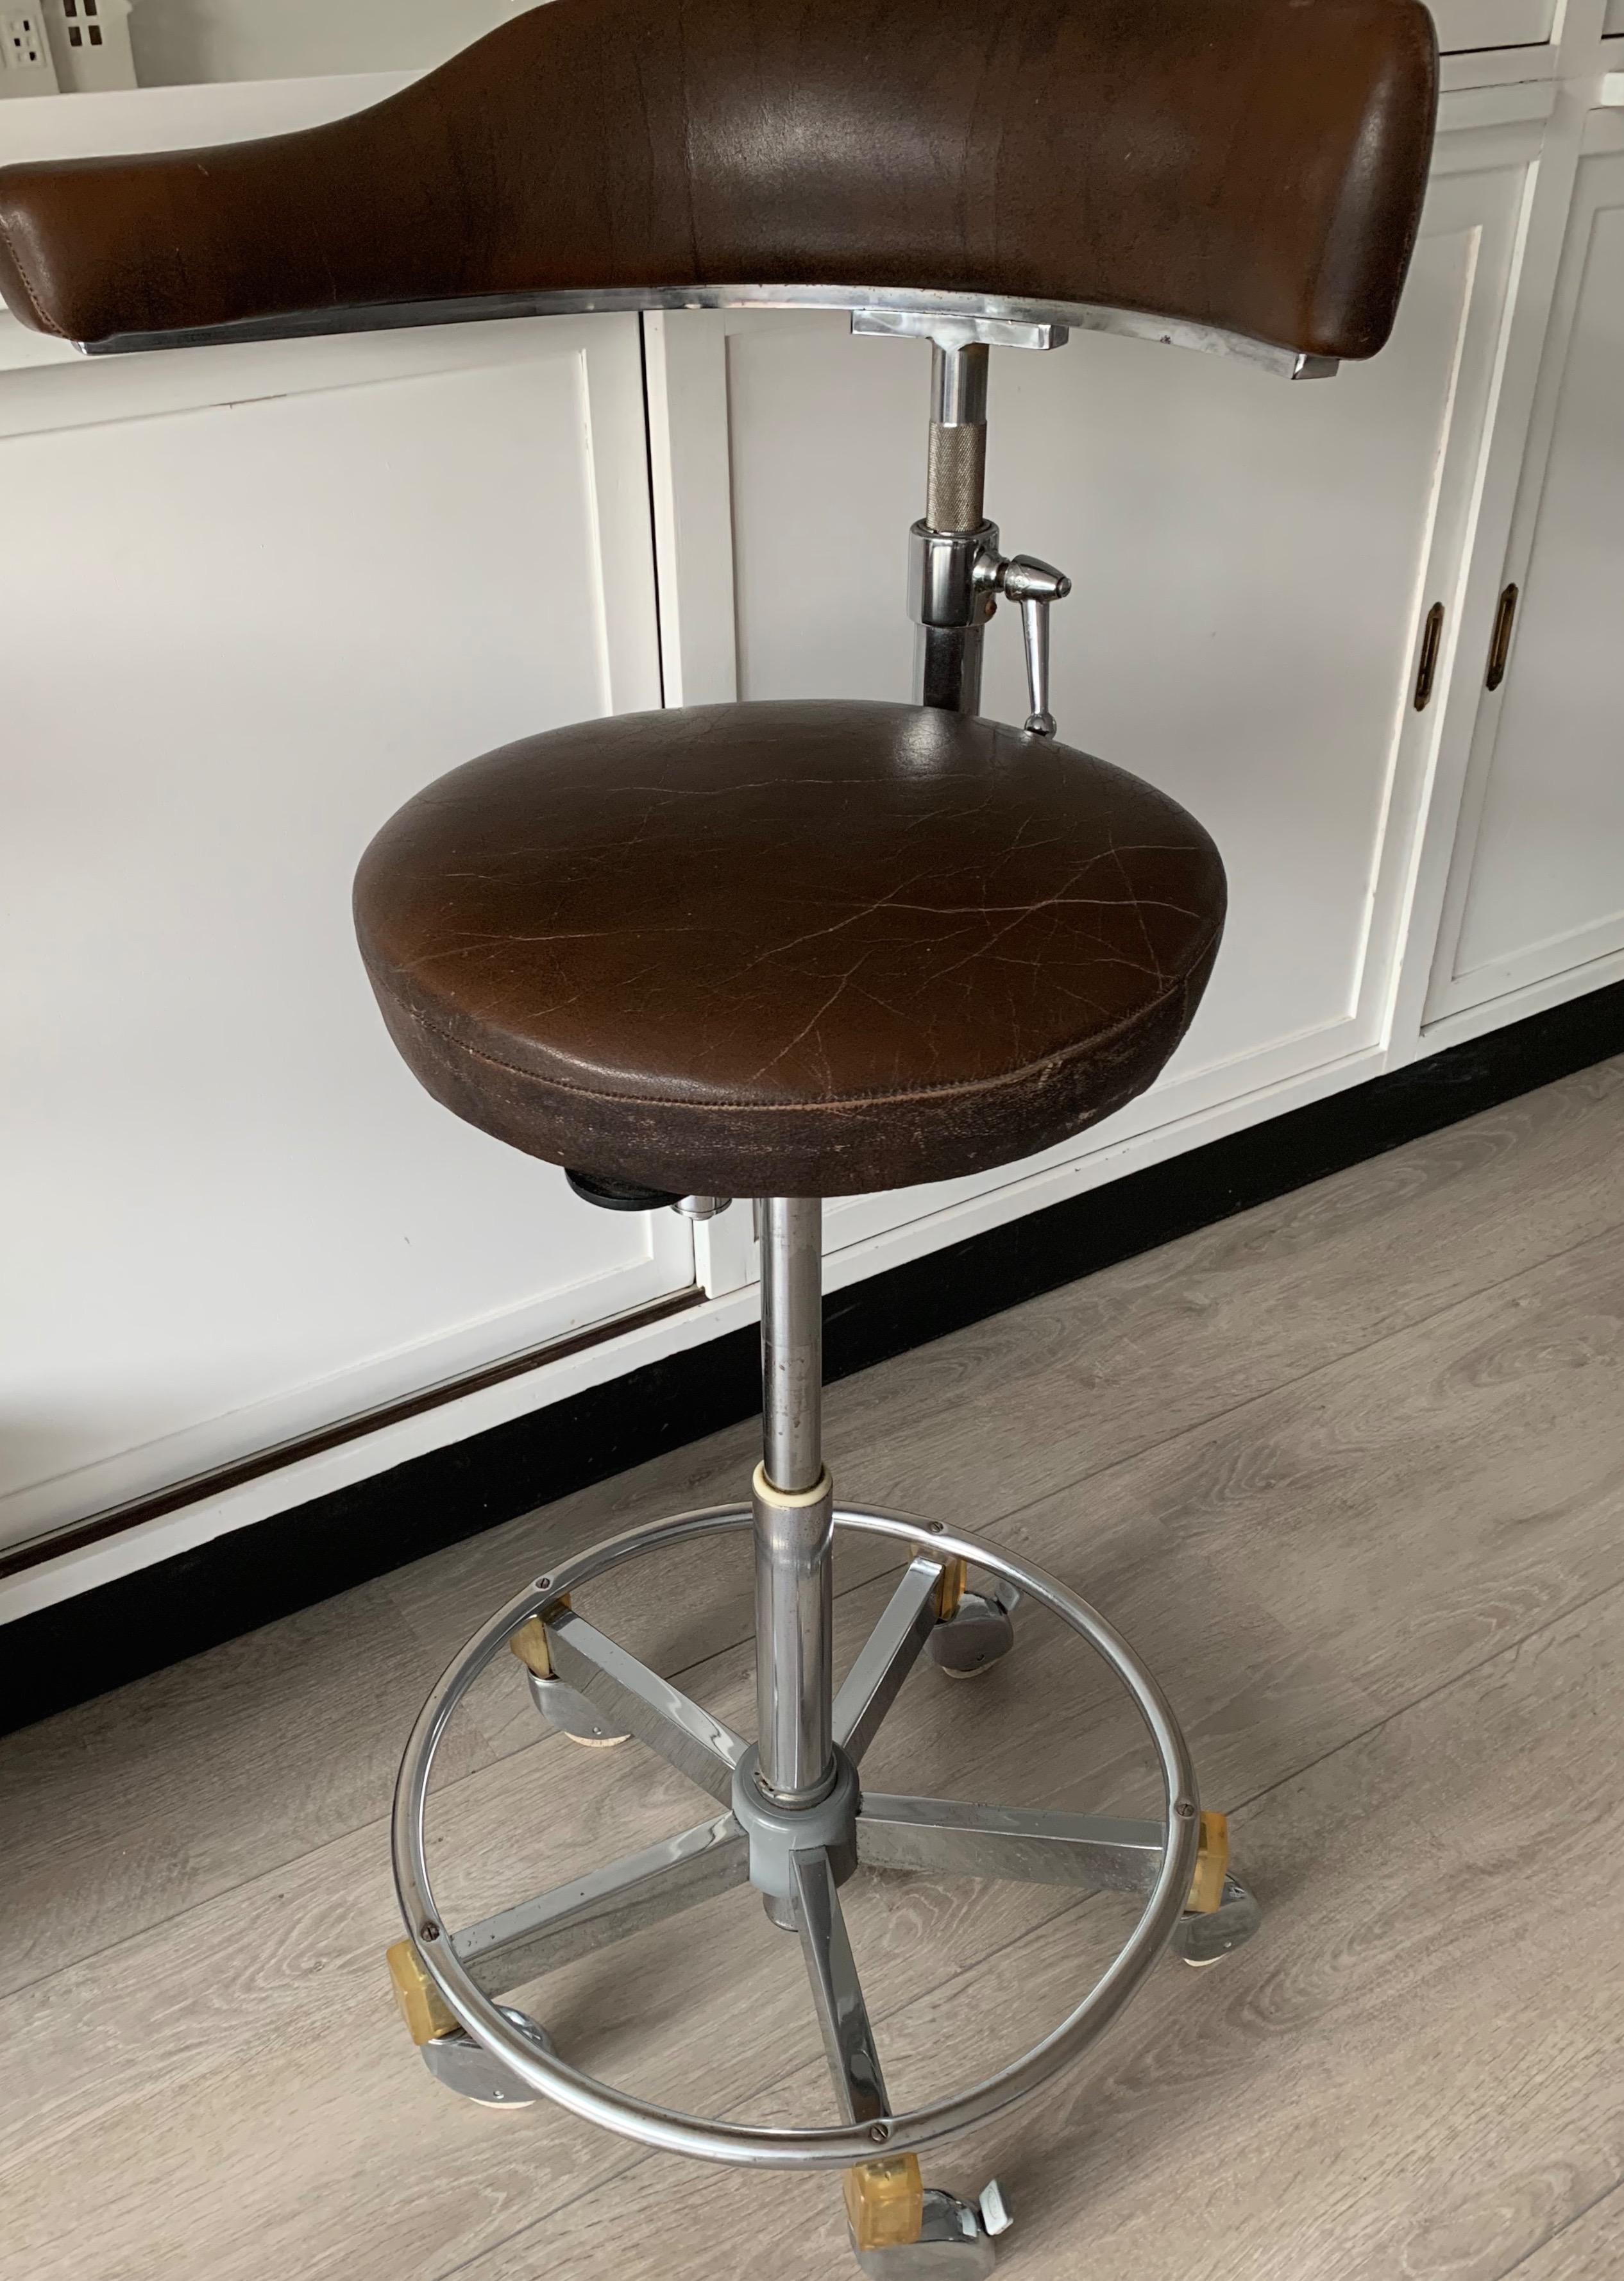 European Rare & Height Adjustable Industrial Chrome Artist Studio Spindle Chair or Stool